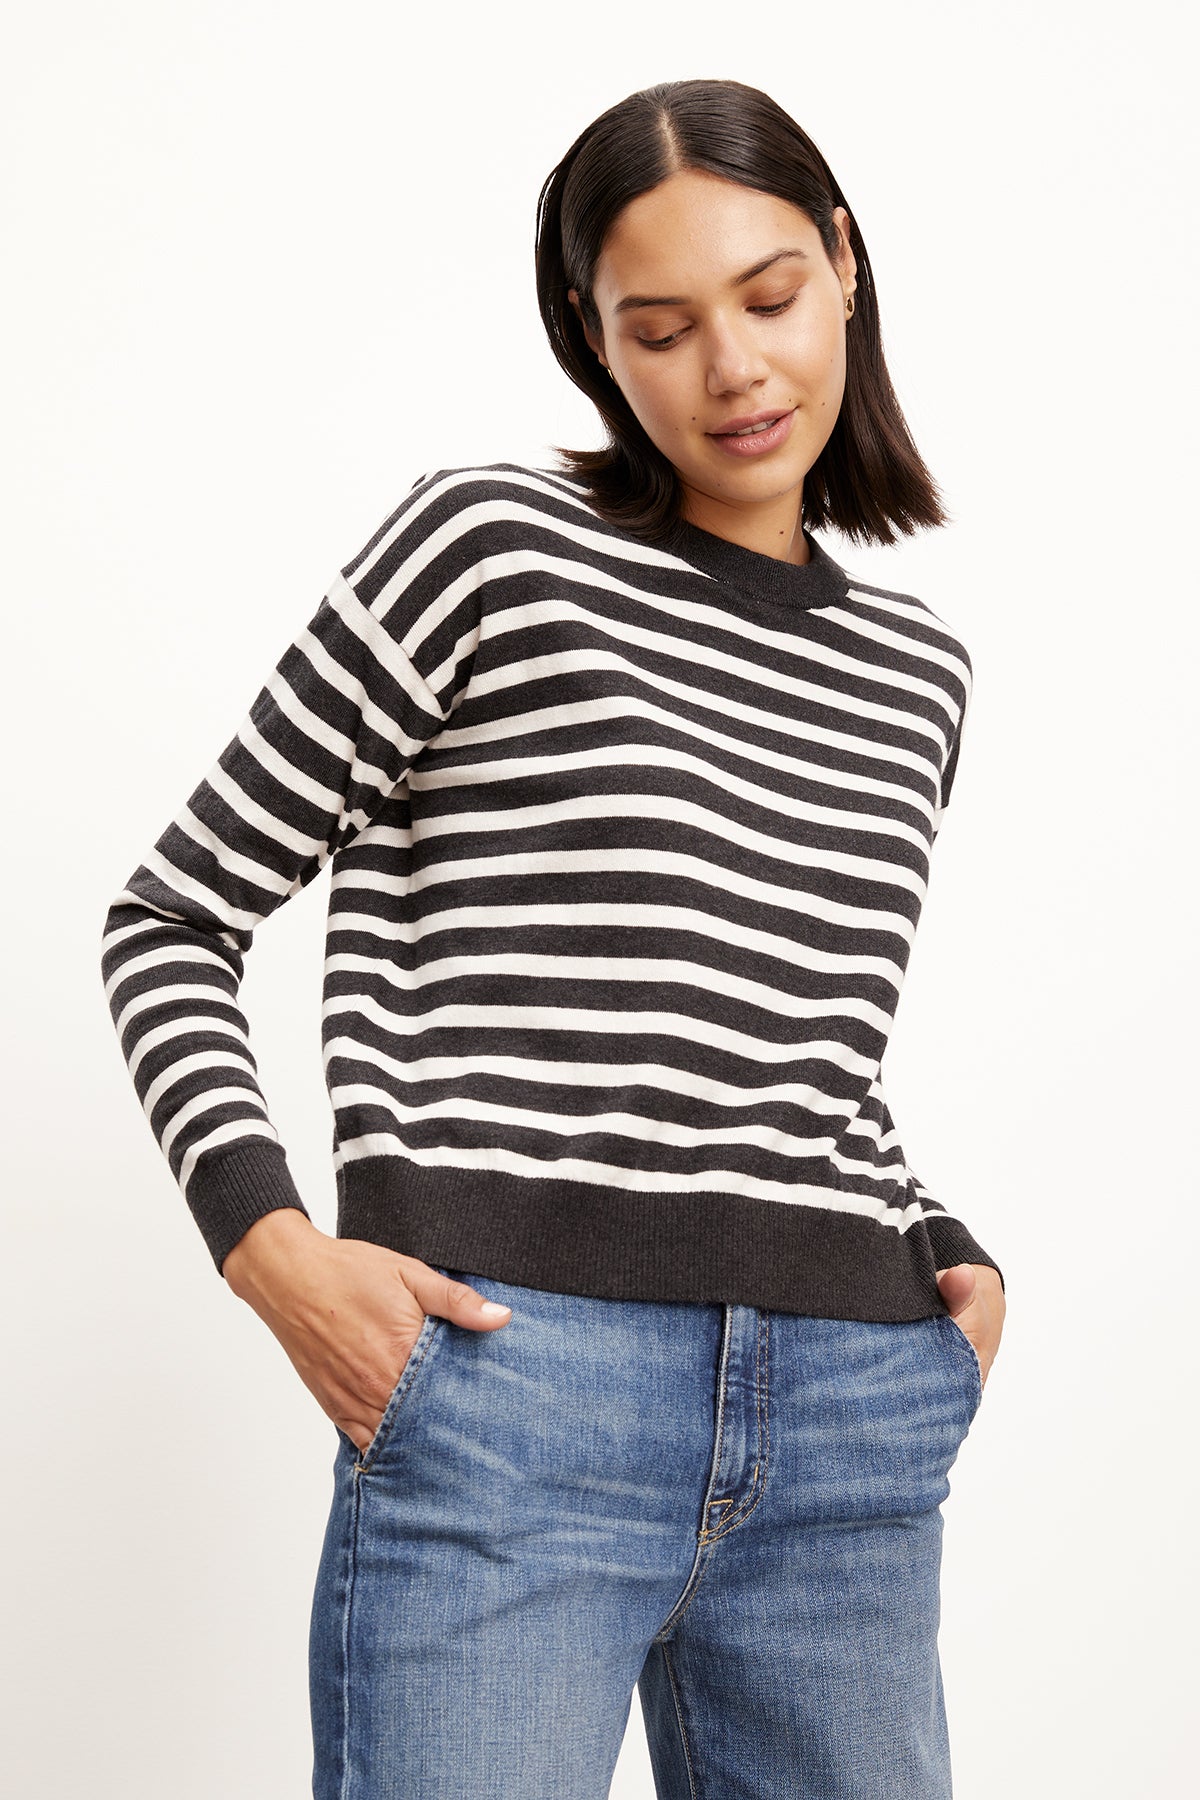   A model wearing the Velvet by Graham & Spencer ALISTER STRIPED CREW NECK SWEATER and jeans. 